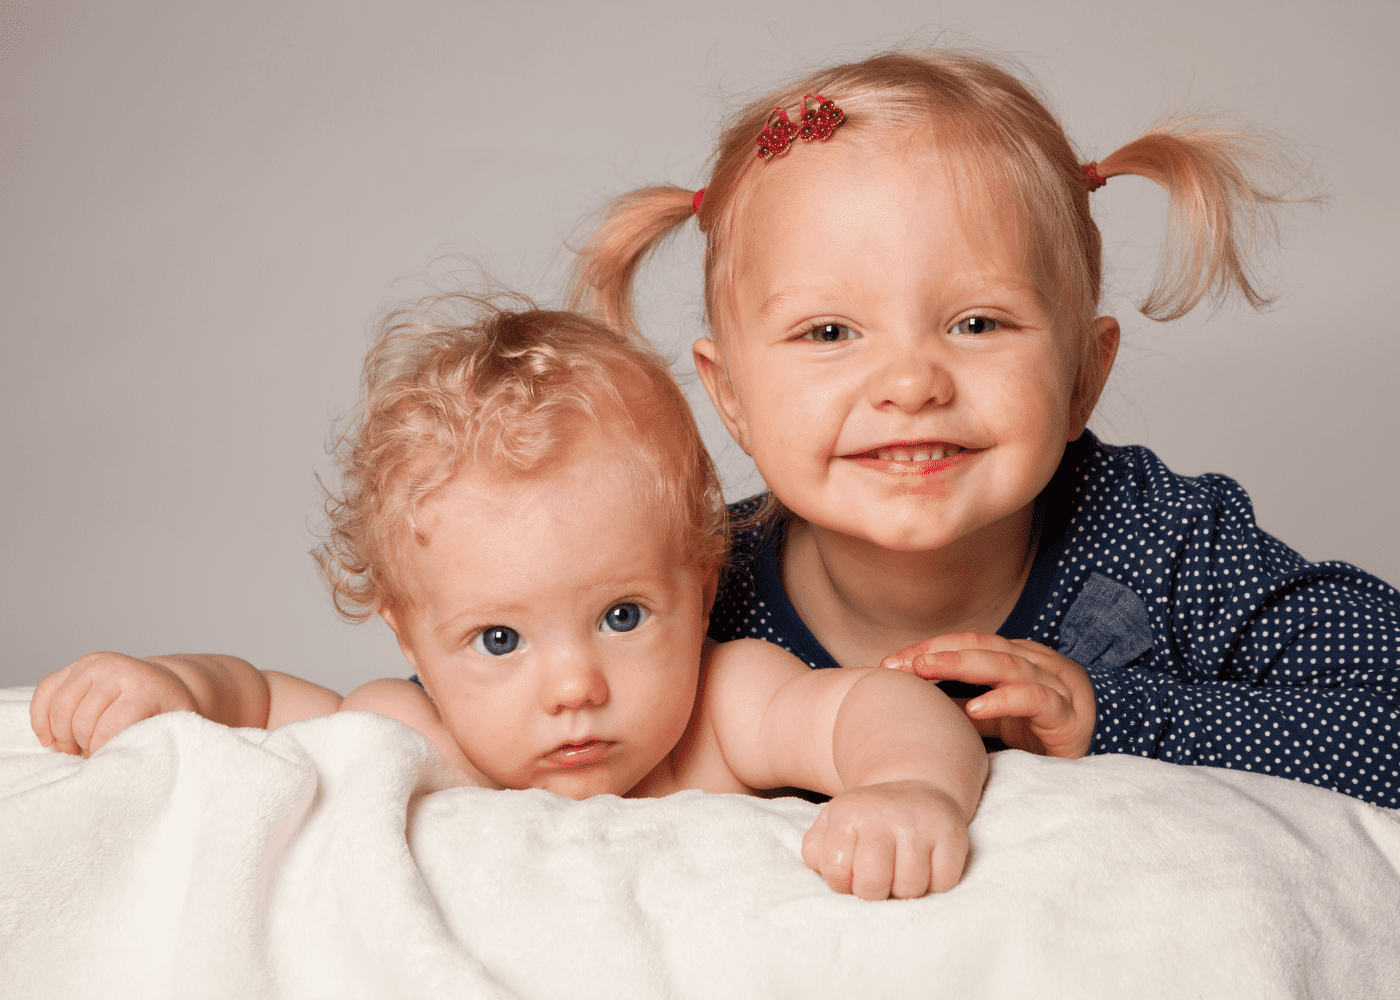 A baby on the left with their big sister on the right smiling.